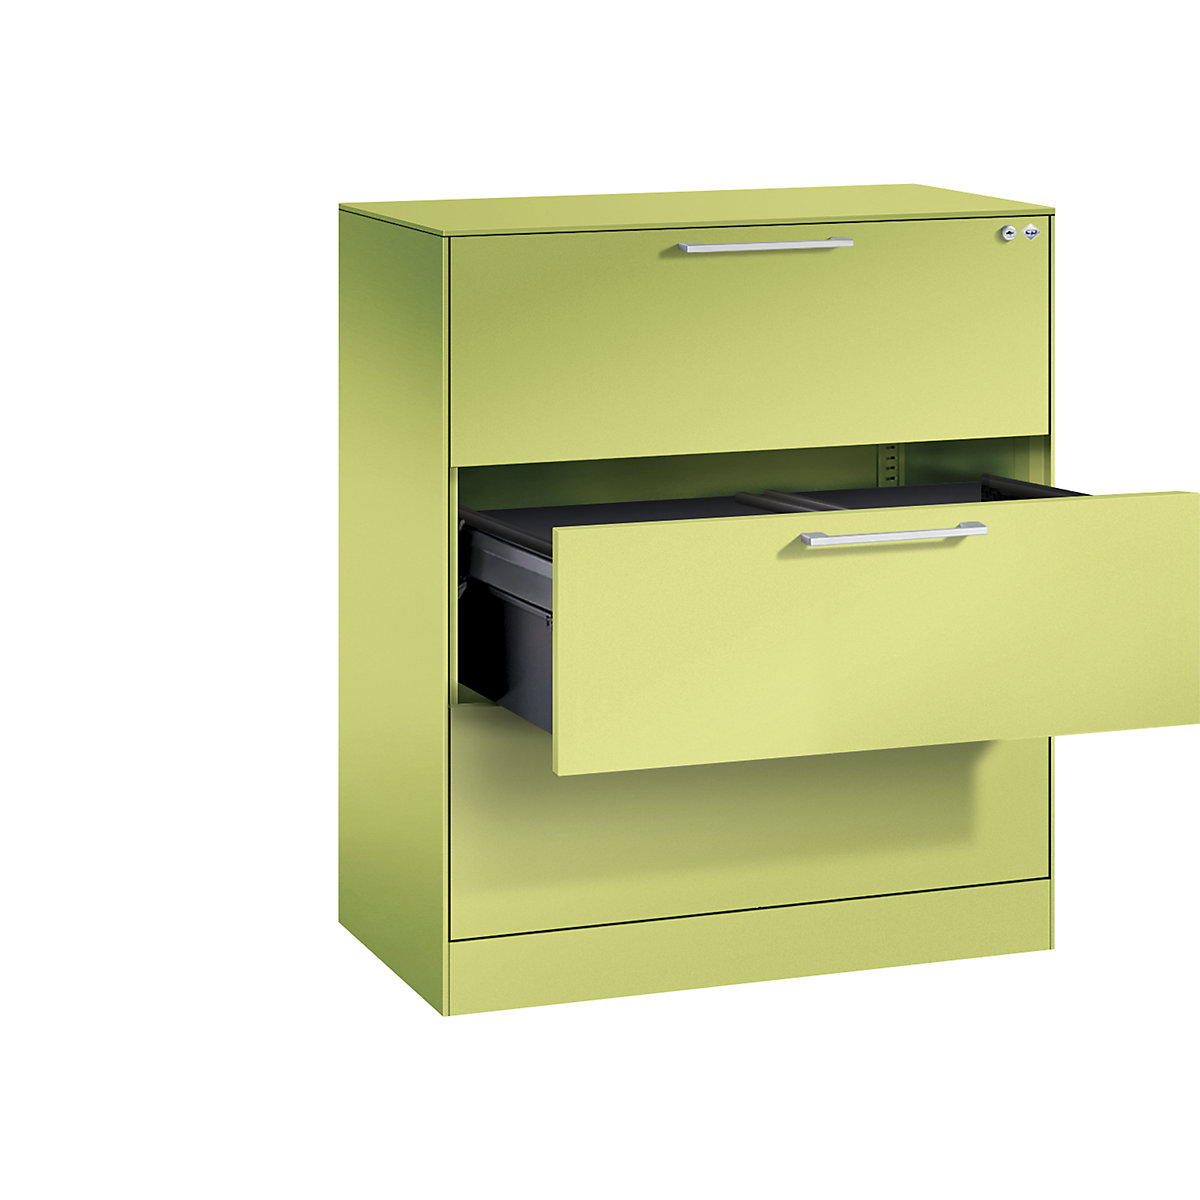 ASISTO suspension filing cabinet – C+P, width 800 mm, with 3 drawers, viridian green/viridian green-6